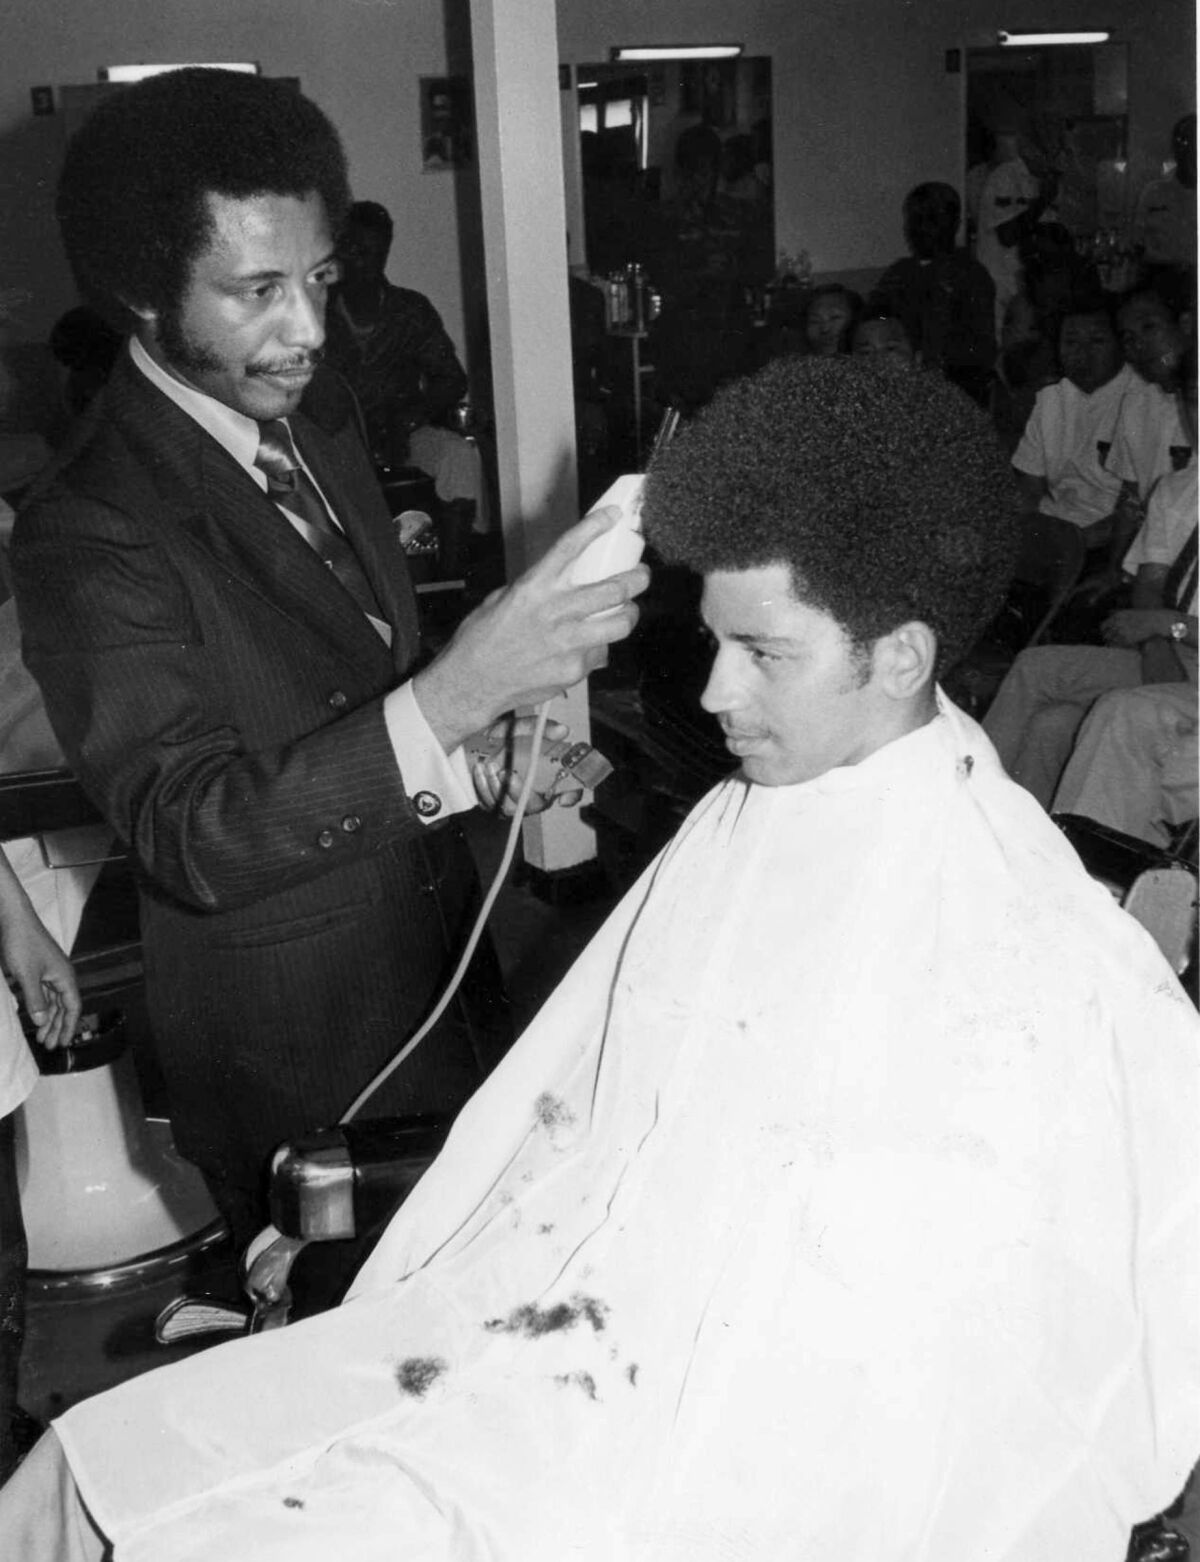 Willie Morrow, pioneer in Black hair care and entrepreneur, dies at 82 -  The San Diego Union-Tribune